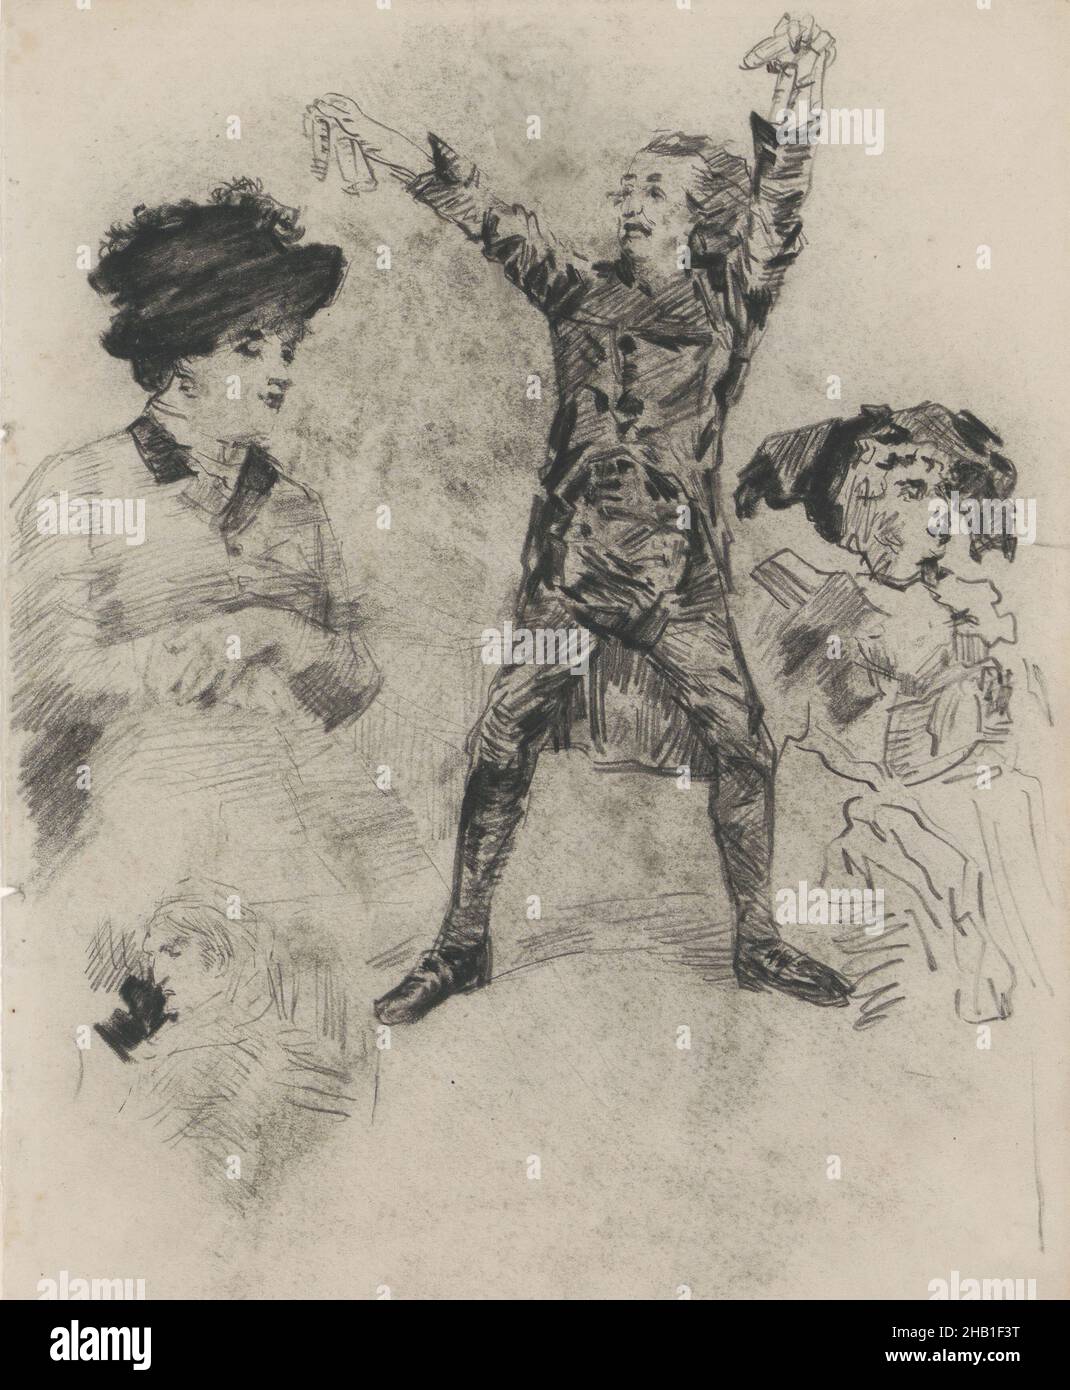 Taskin as a miracle worker in Hoffmann's tales, James Ensor, 1800, drawing, between circa 1883 and circa 1890, Belgian Art Stock Photo